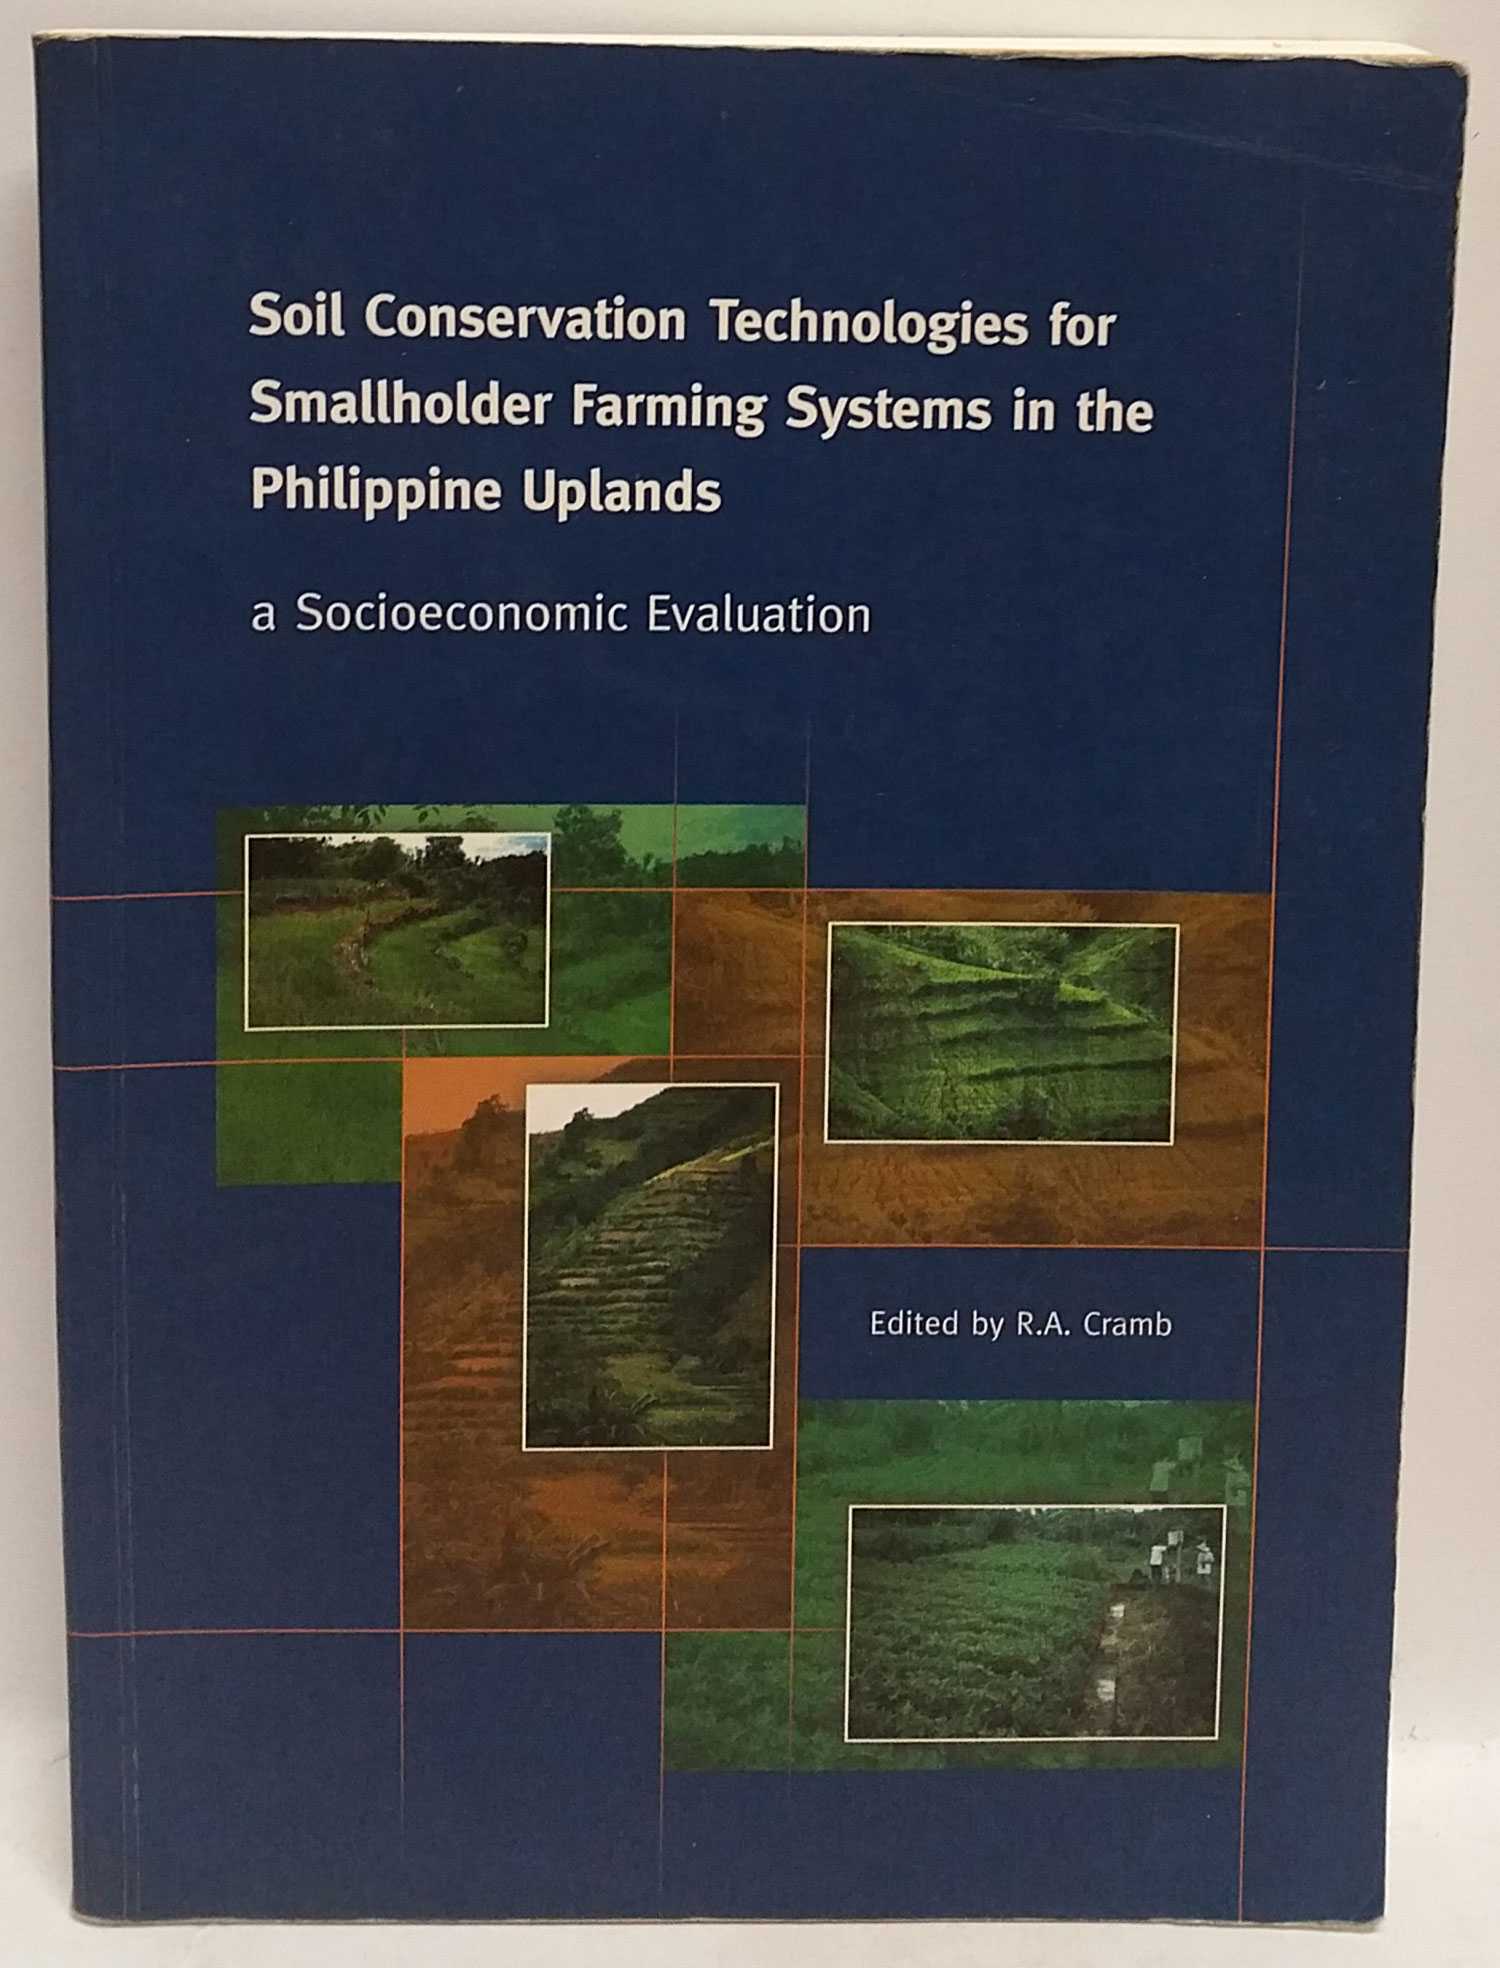 R. A. Cramb - Soil Conservation Technologies for Smallholder Farming Systems in the Philippine Uplands: a Socioeconomic Evaluation